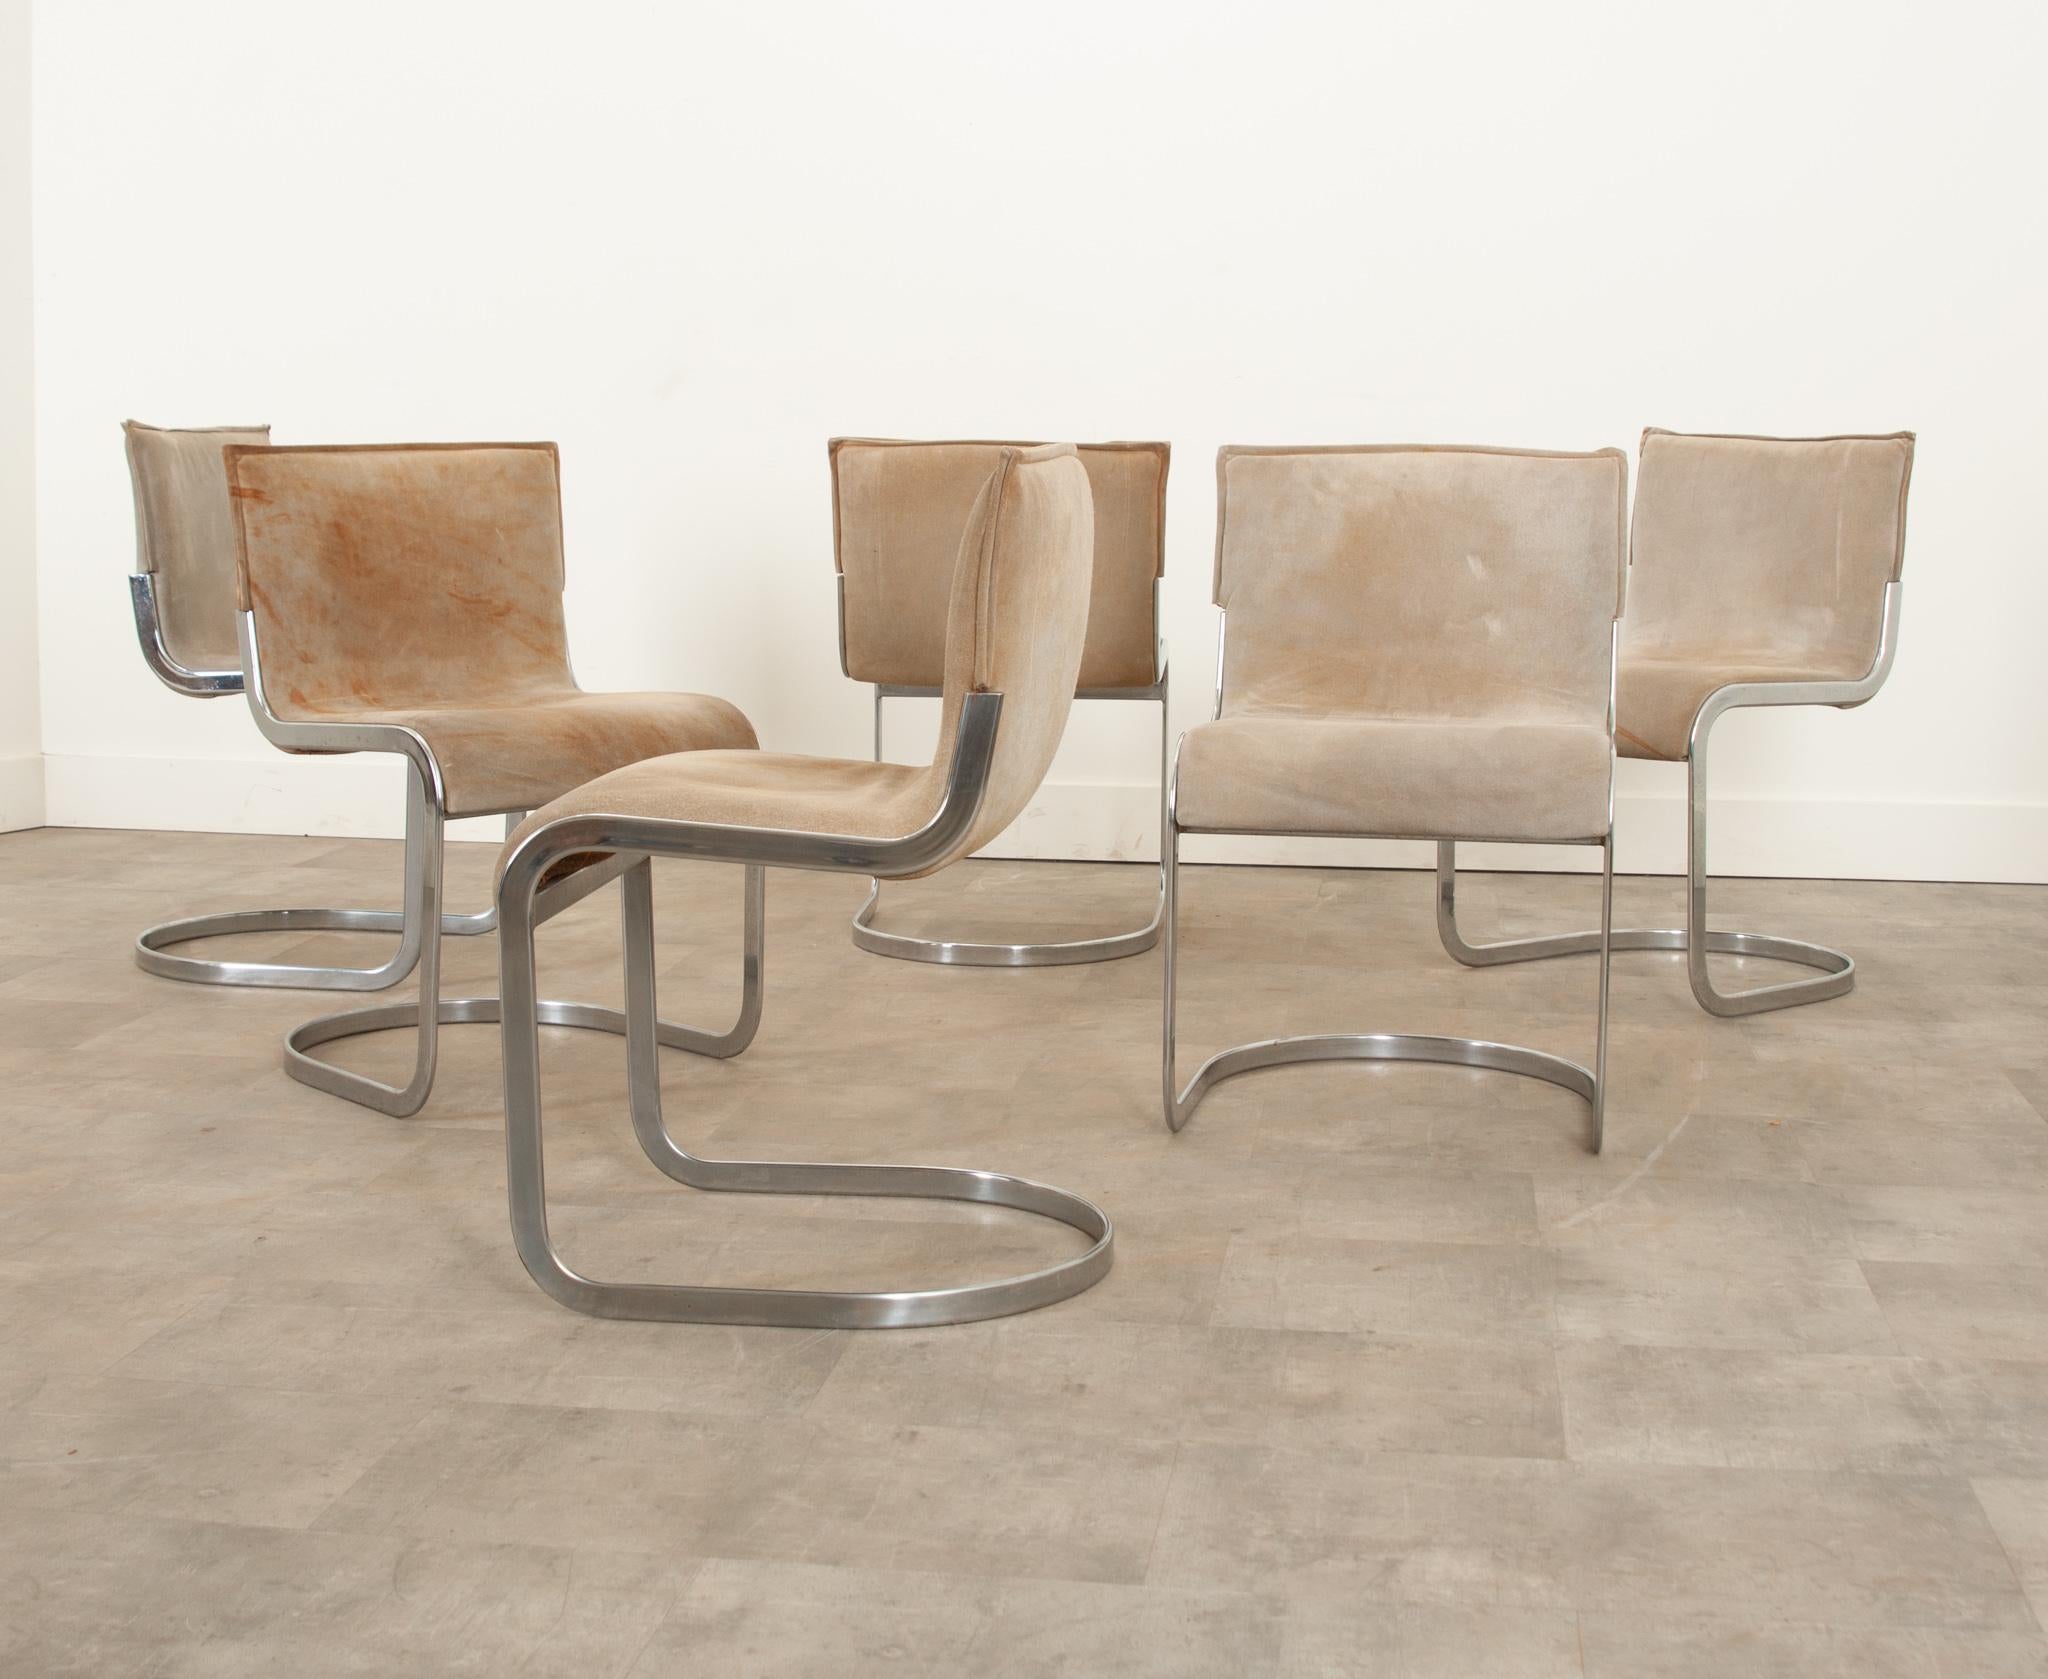 This no-frills set of six Mid-Century Modern cantilever chairs are a wonderful addition to any dining space for their comfort and functional design. The well loved suede has staining that adds a ton of character. The chrome frames are a great